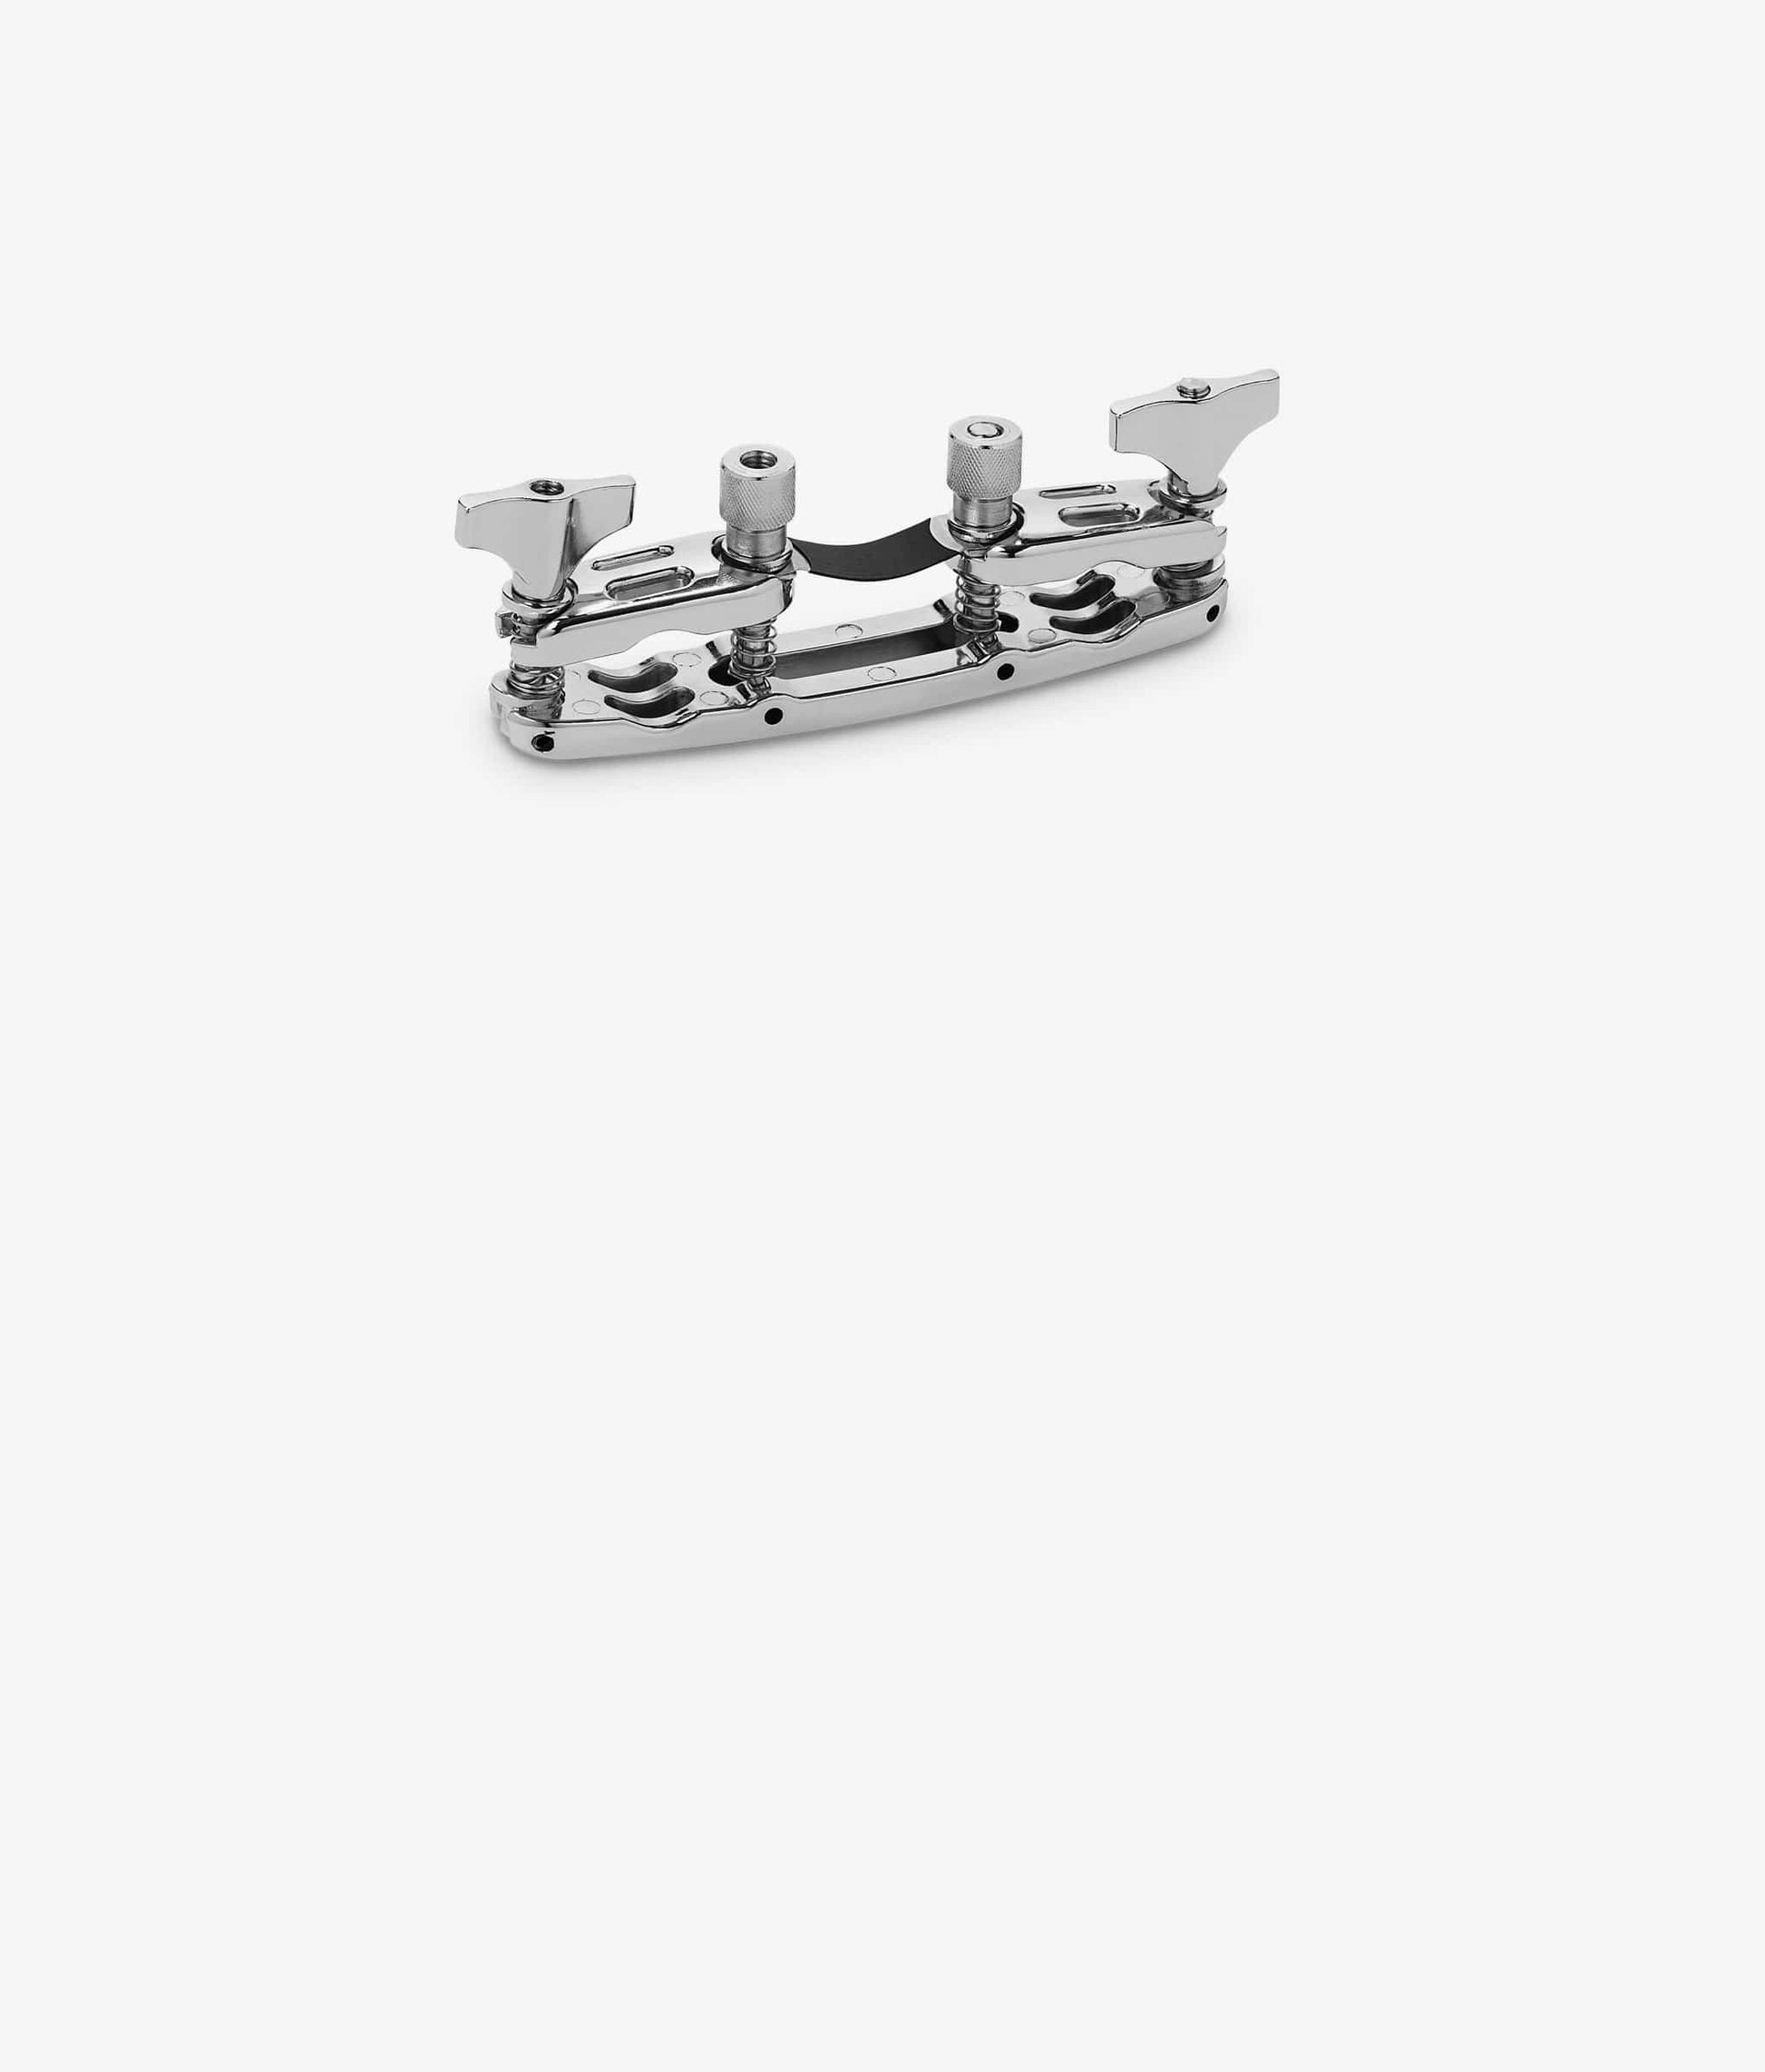  Gibraltar SC-FMC 2-Way Quick Release Multi Clamp for Drum / Cymbal Stands & Holders 2 way multi clamp